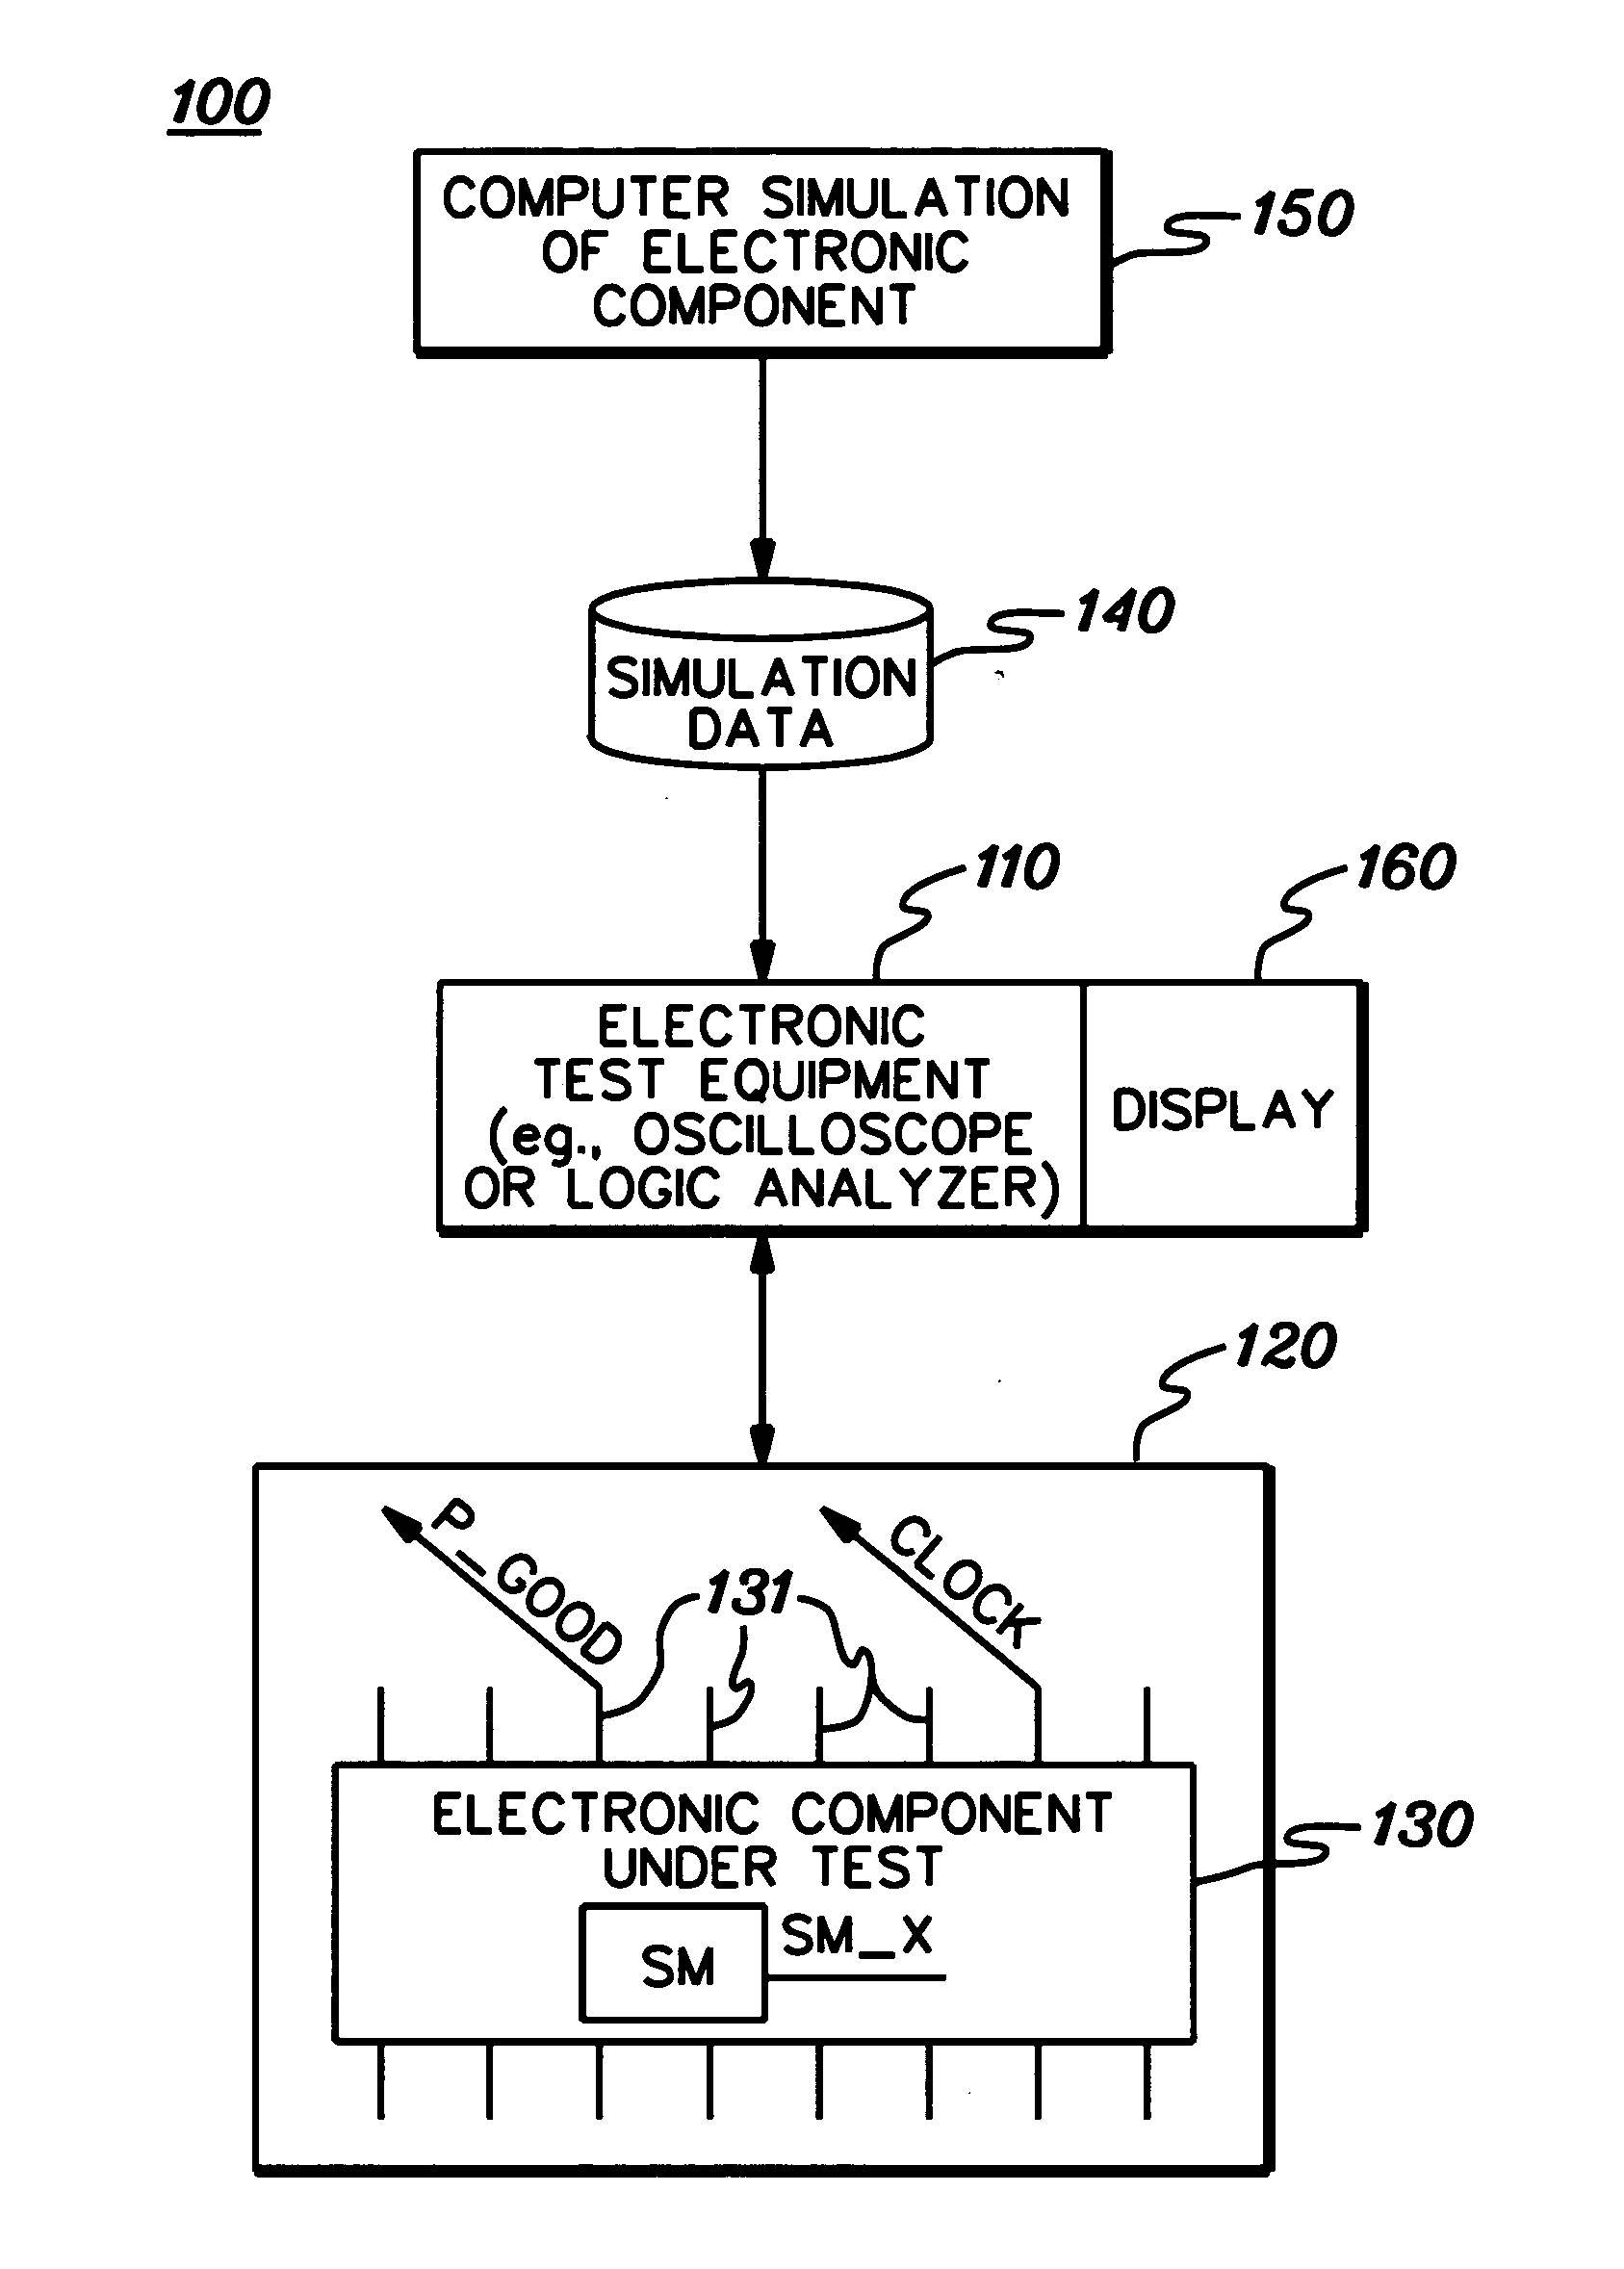 Importation of virtual signals into electronic test equipment to facilitate testing of an electronic component